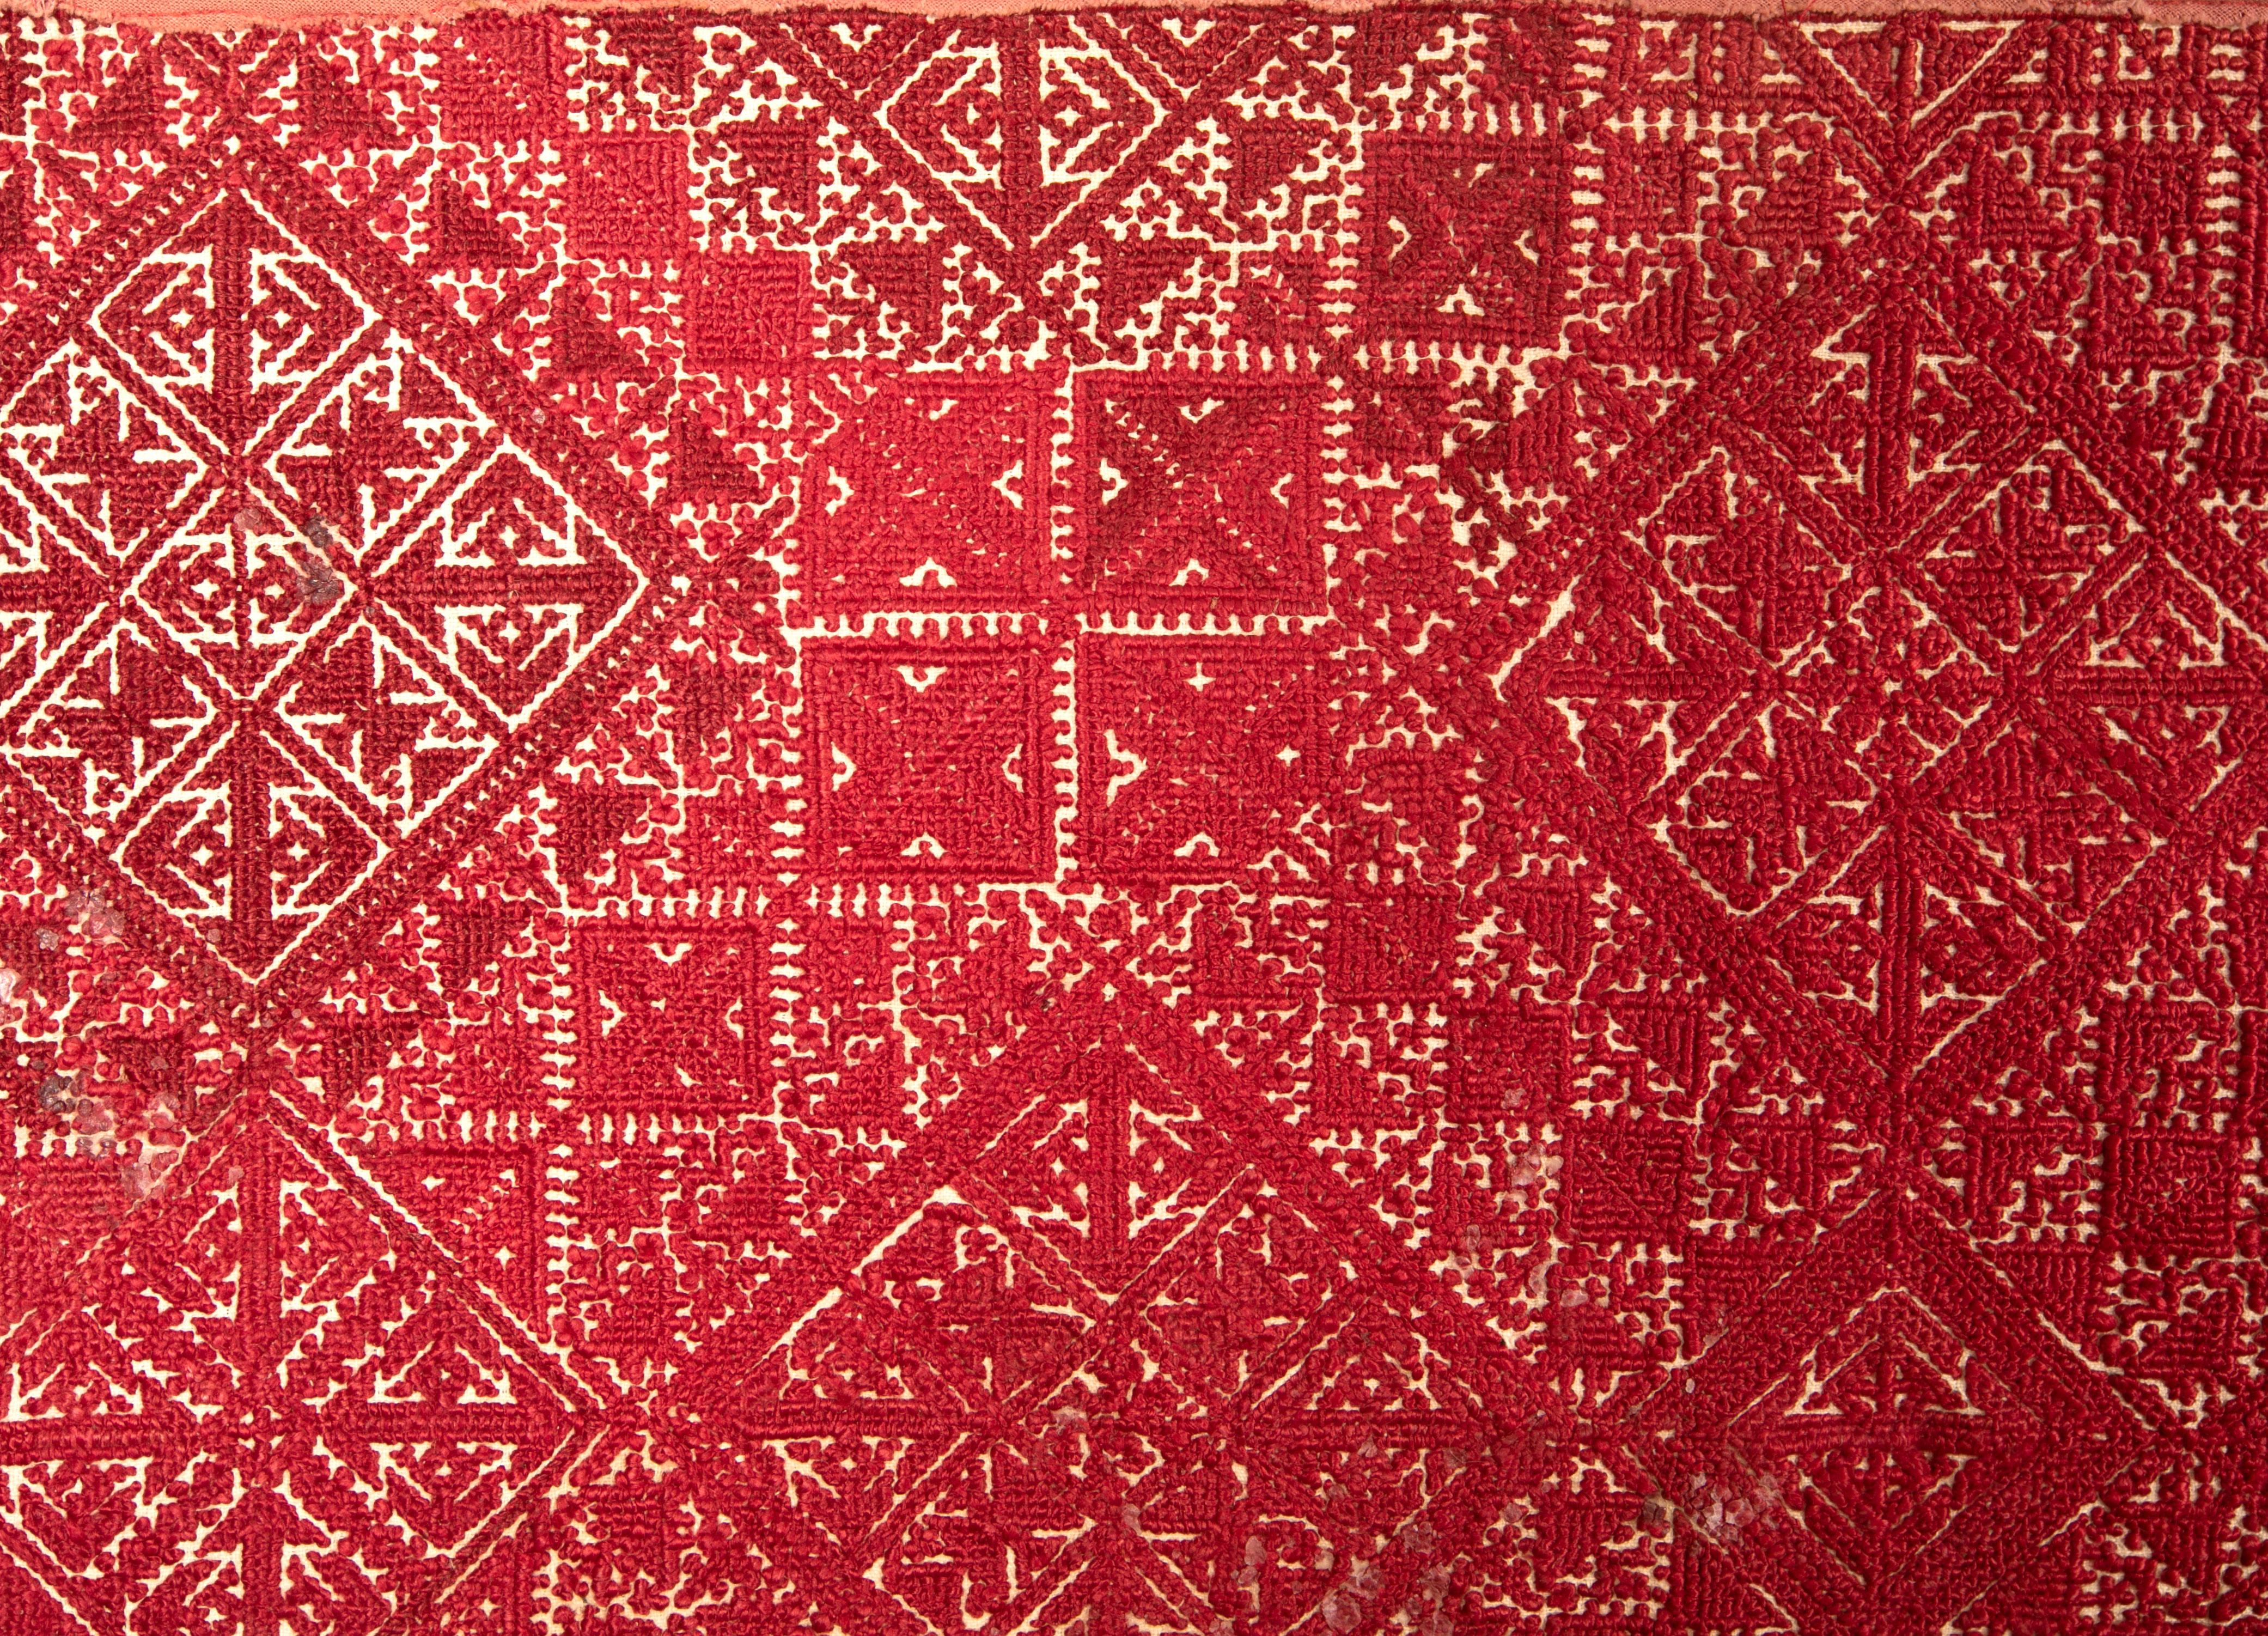 Embroidered Antique Fez Embroidery from Morocco, 1900s